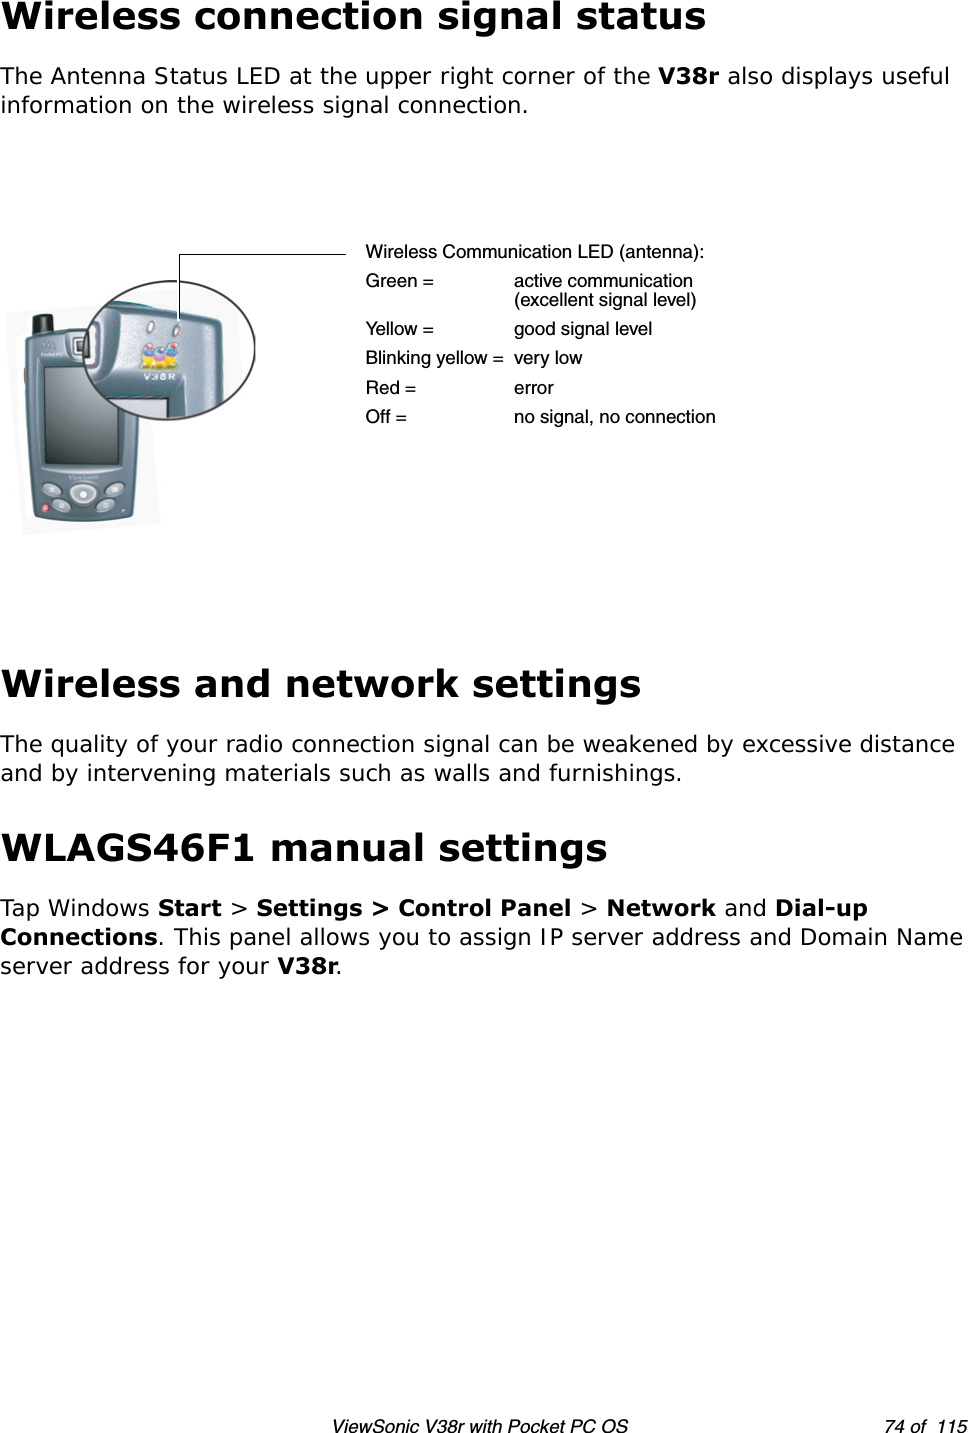 ViewSonic V38r with Pocket PC OS 74 of  115Wireless connection signal statusThe Antenna Status LED at the upper right corner of the V38r also displays useful information on the wireless signal connection.Wireless and network settingsThe quality of your radio connection signal can be weakened by excessive distance and by intervening materials such as walls and furnishings. WLAGS46F1 manual settingsTap Windows Start &gt; Settings &gt; Control Panel &gt; Network and Dial-up Connections. This panel allows you to assign IP server address and Domain Name server address for your V38r. Wireless Communication LED (antenna):Green = active communication(excellent signal level)Yellow = good signal levelBlinking yellow = very lowRed = errorOff = no signal, no connection